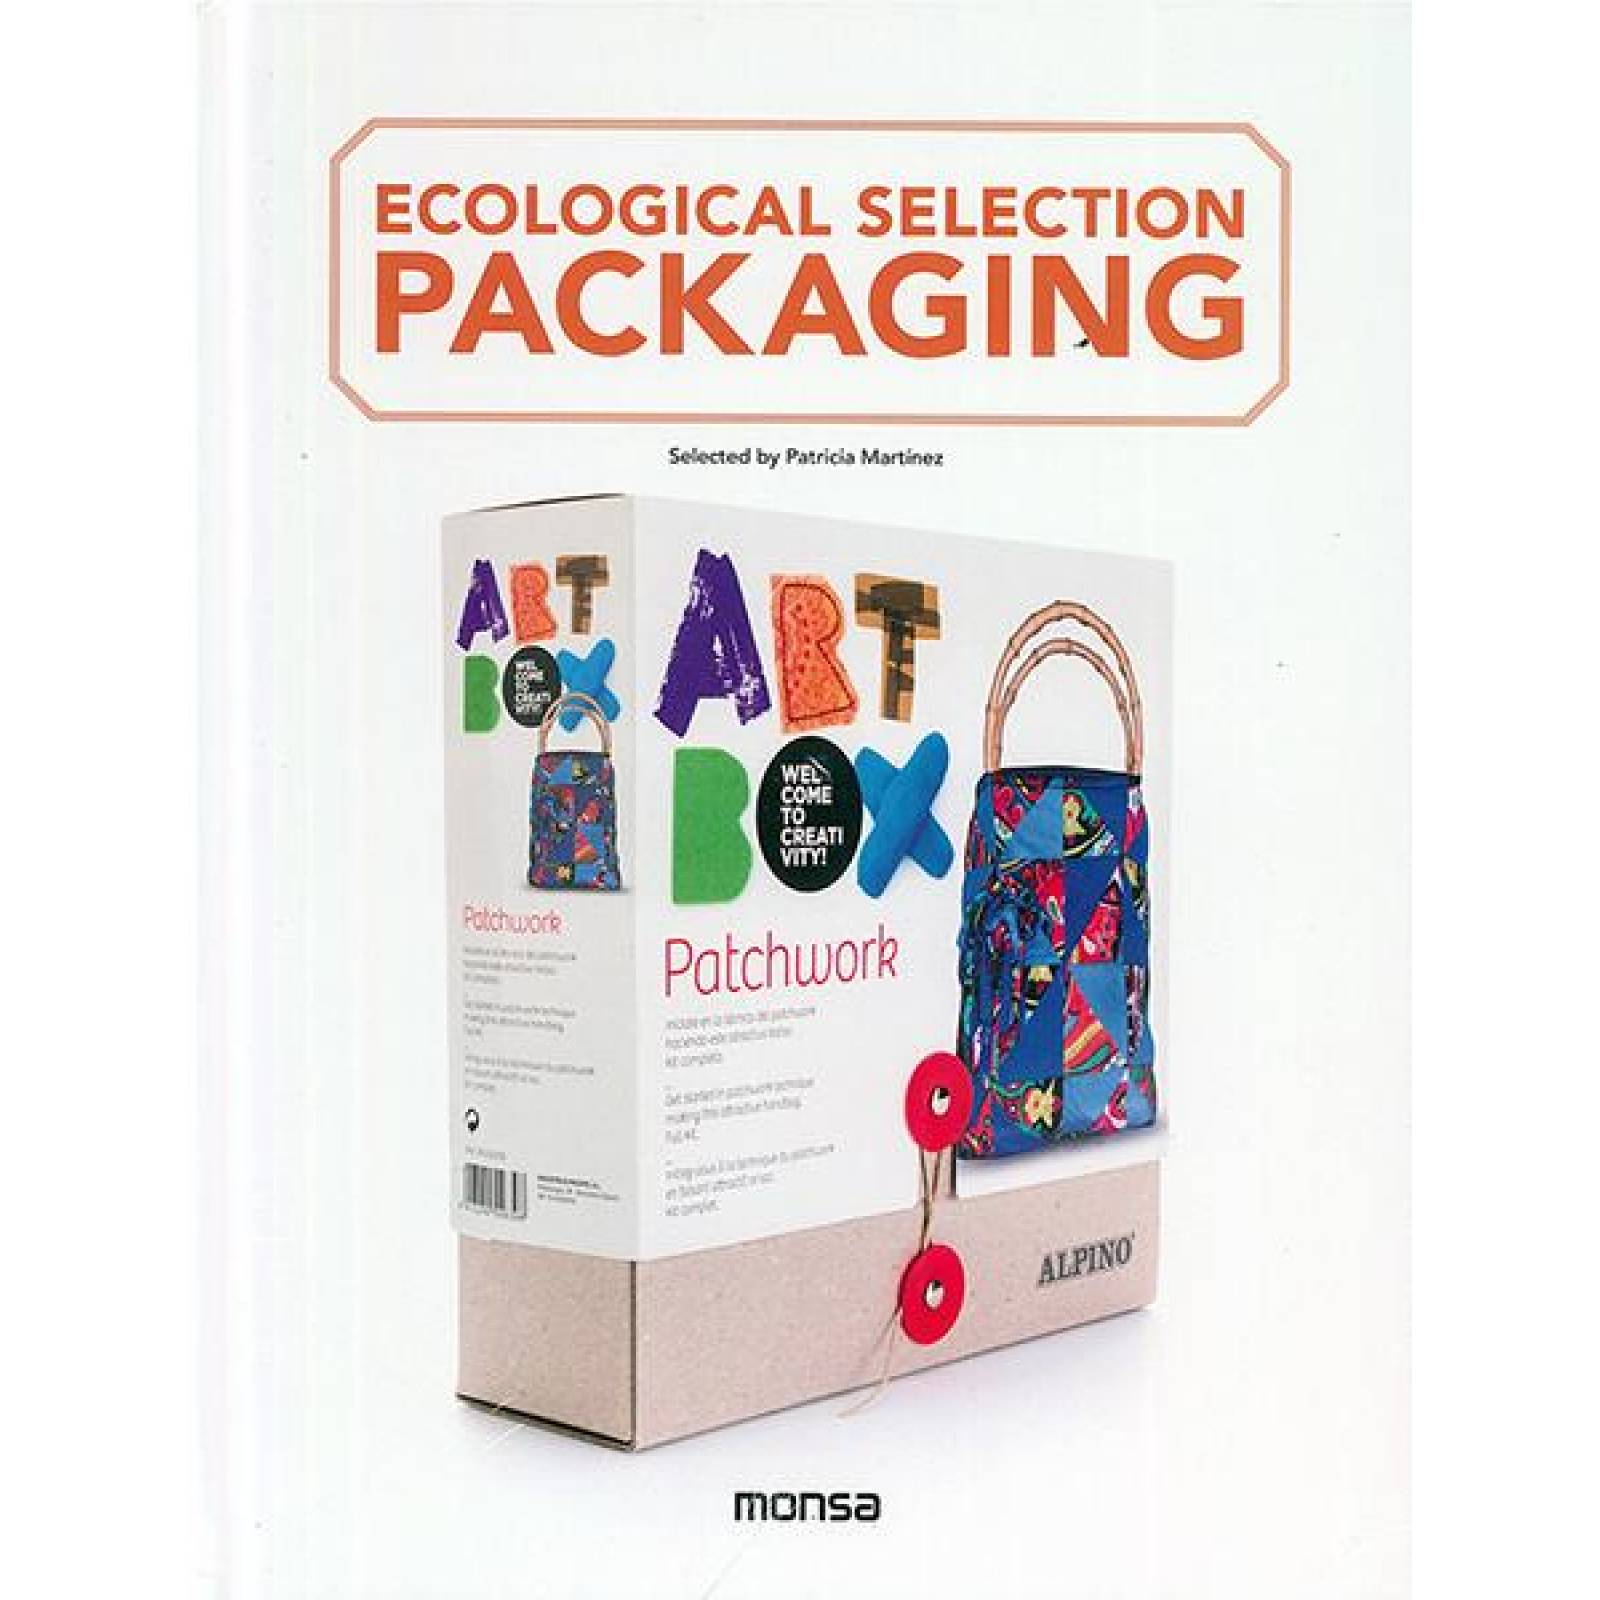 Packaging ecological selection 